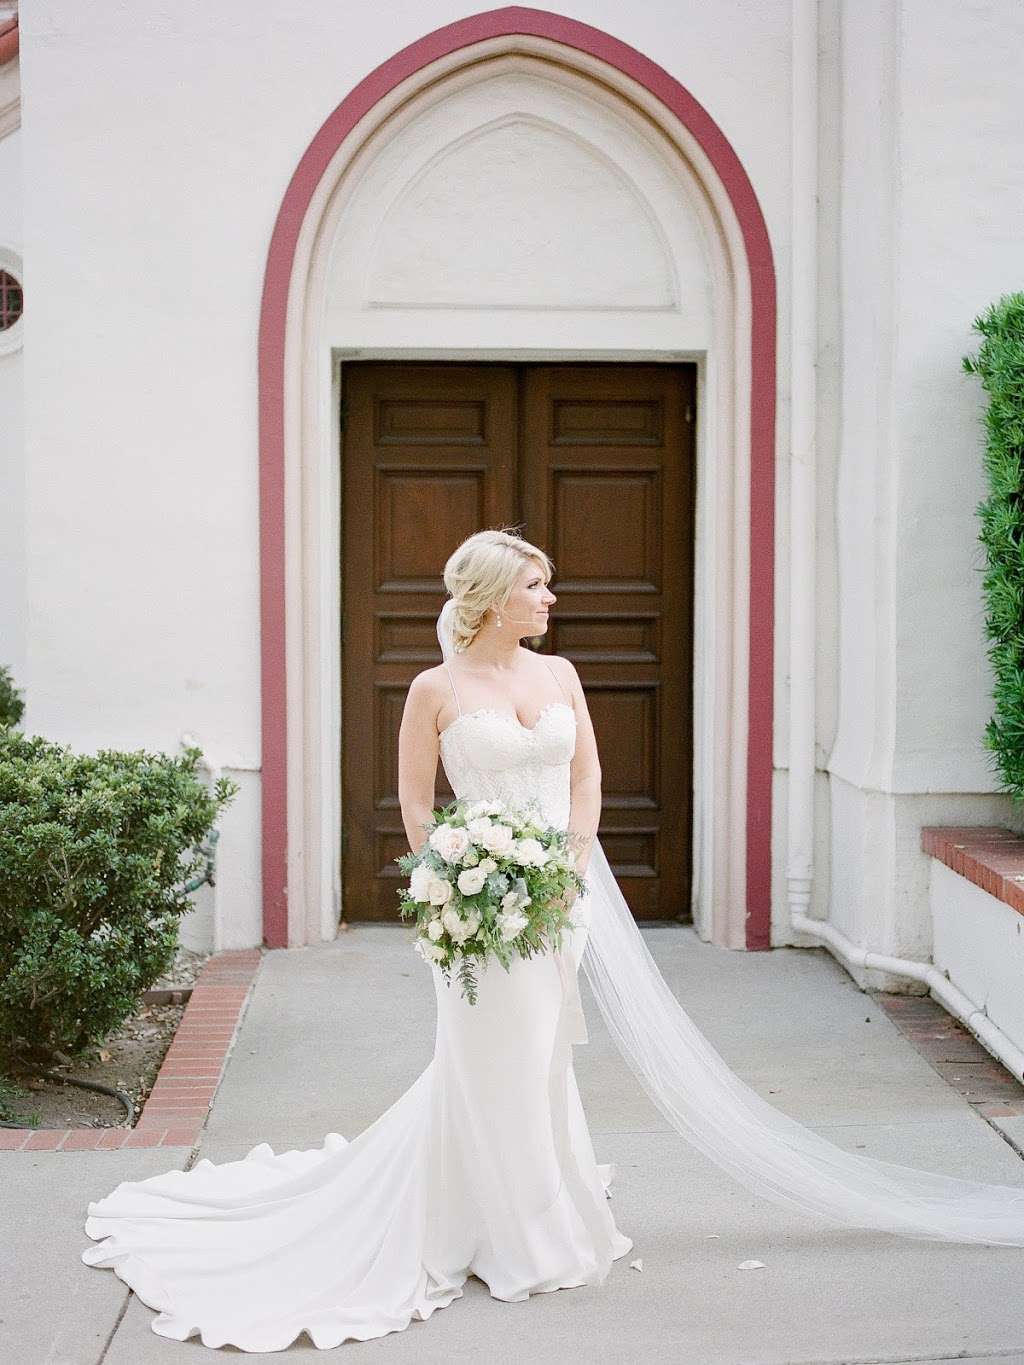 A Stitch In Time Bridal Services | 131 S Barrington Pl, Los Angeles, CA 90049 | Phone: (310) 476-1700